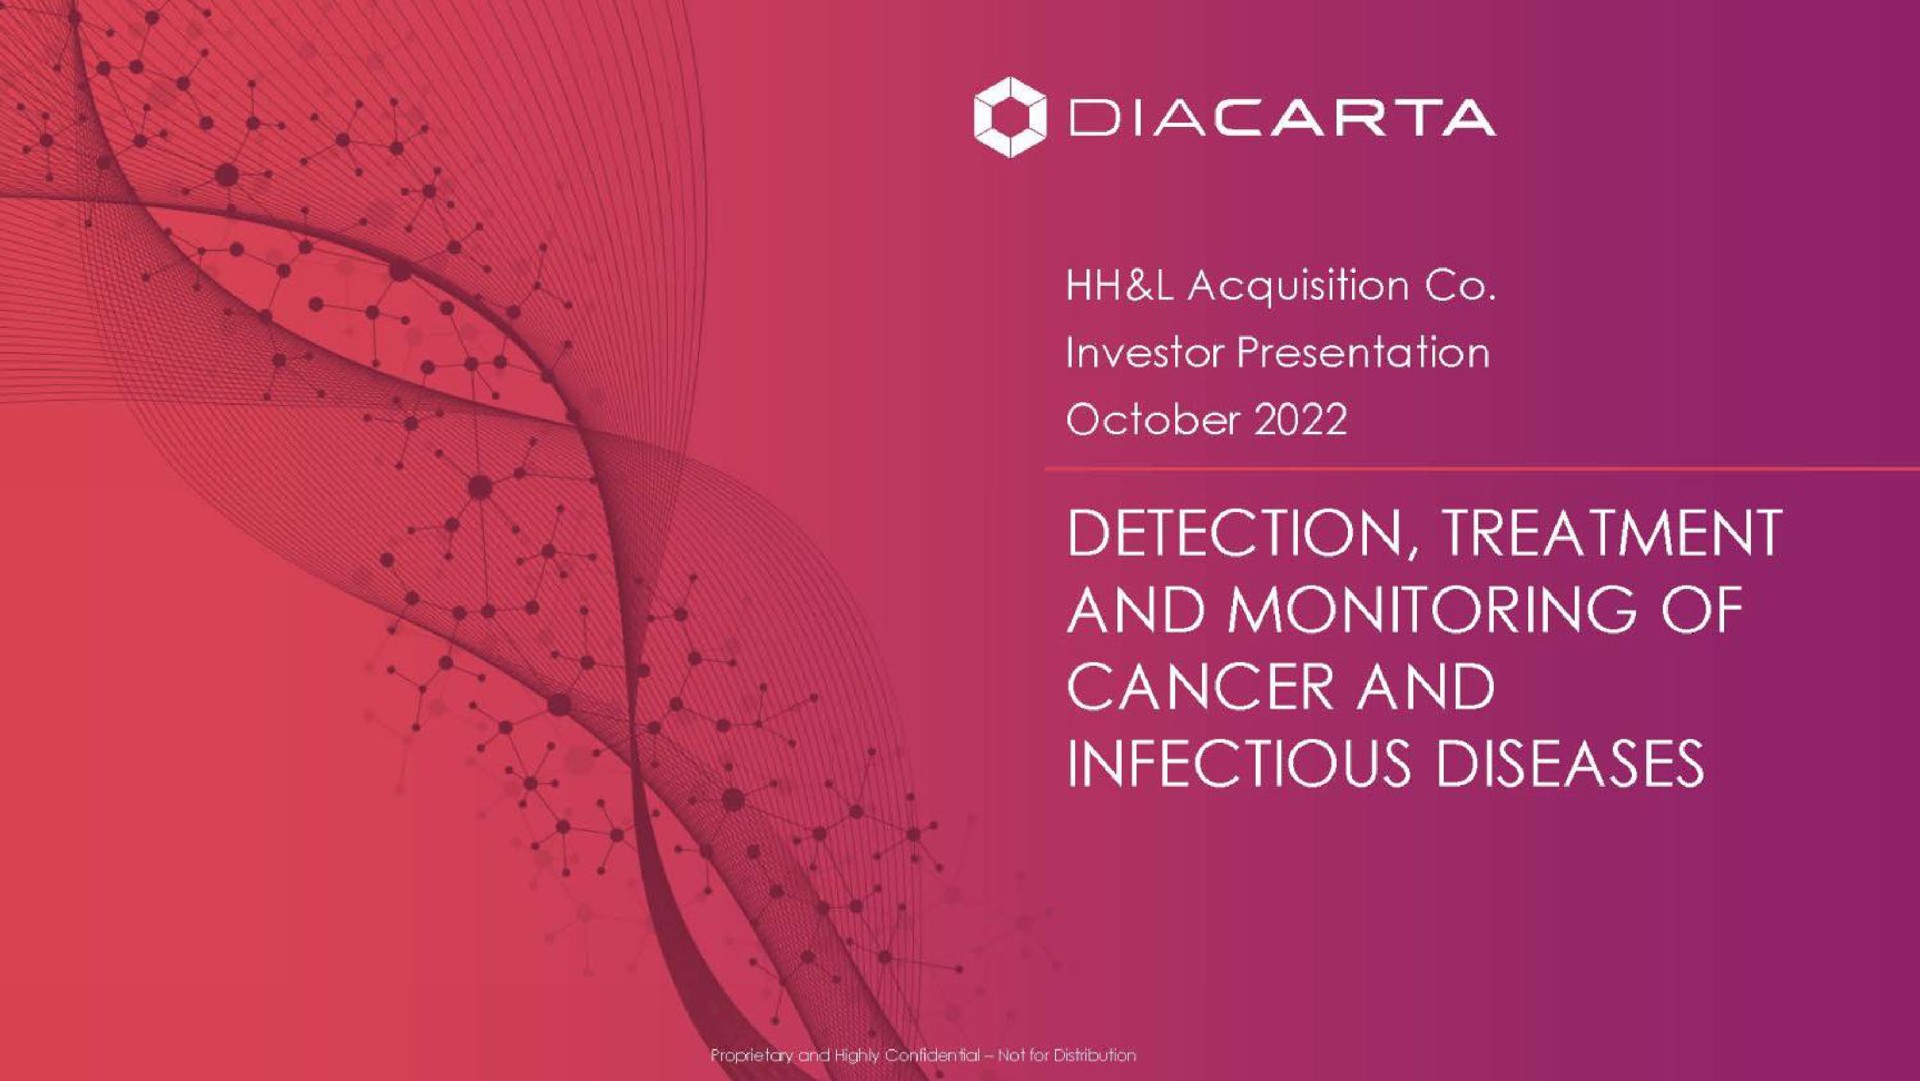 acquisition investor presentation detection treatment and monitoring of of infectious diseases | DiaCarta